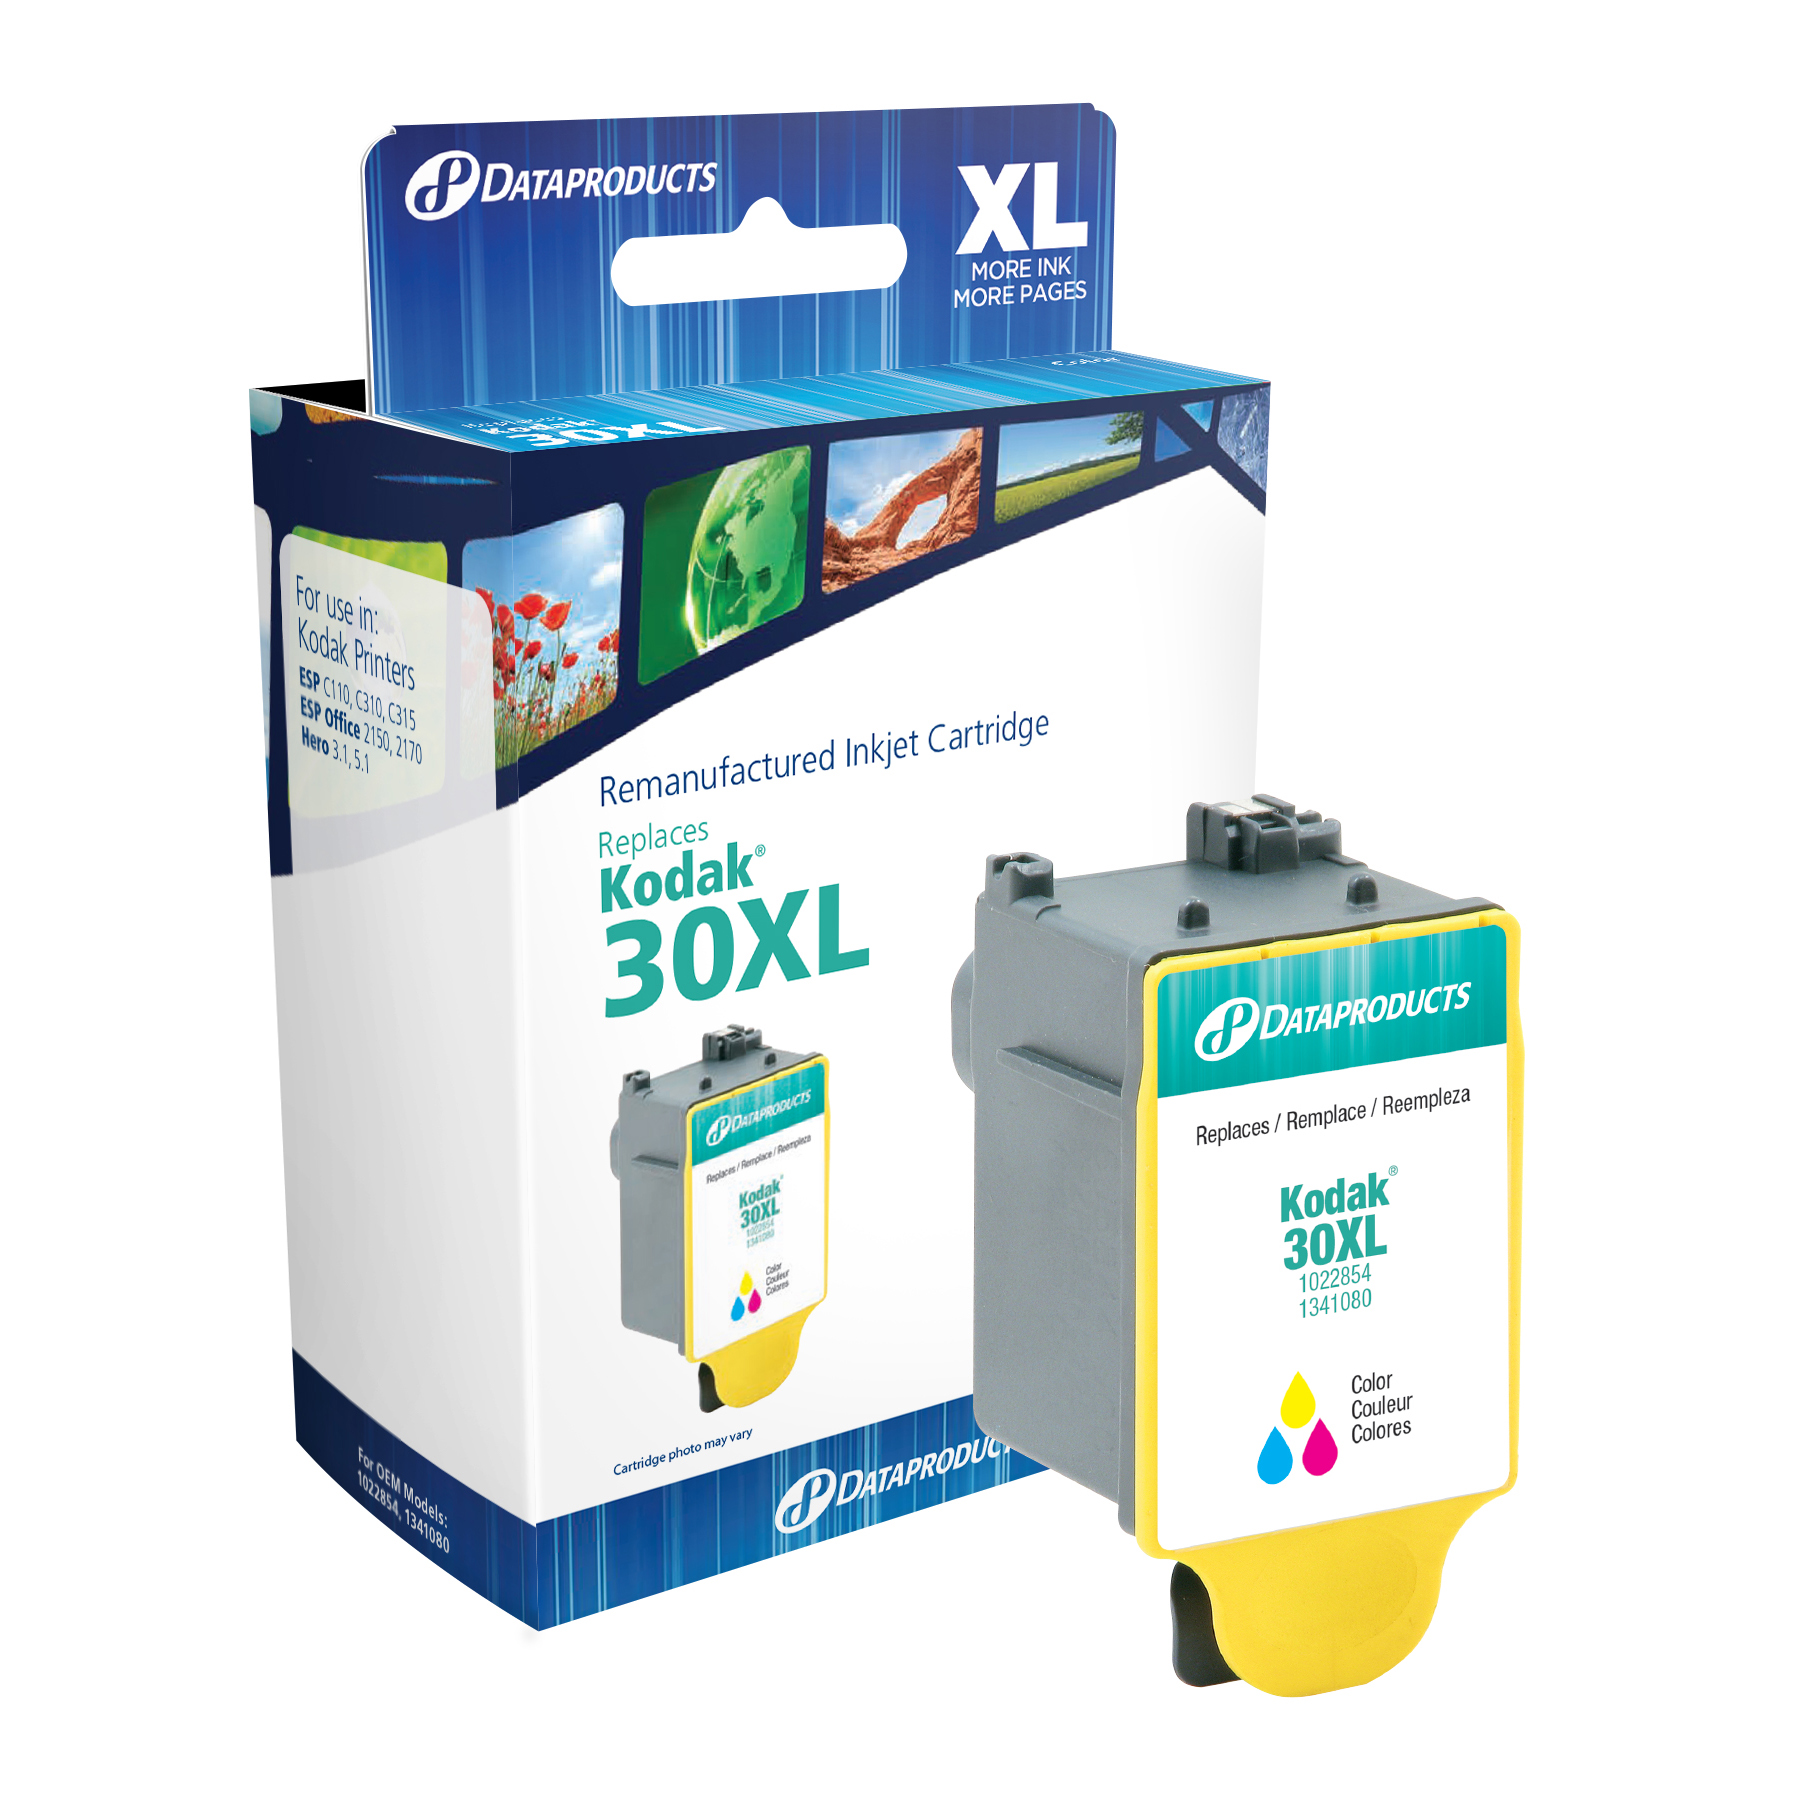 Dataproducts DPCK30CXL Remanufactured Inkjet Cartridge for Kodak 30XL - High Yield Color Ink